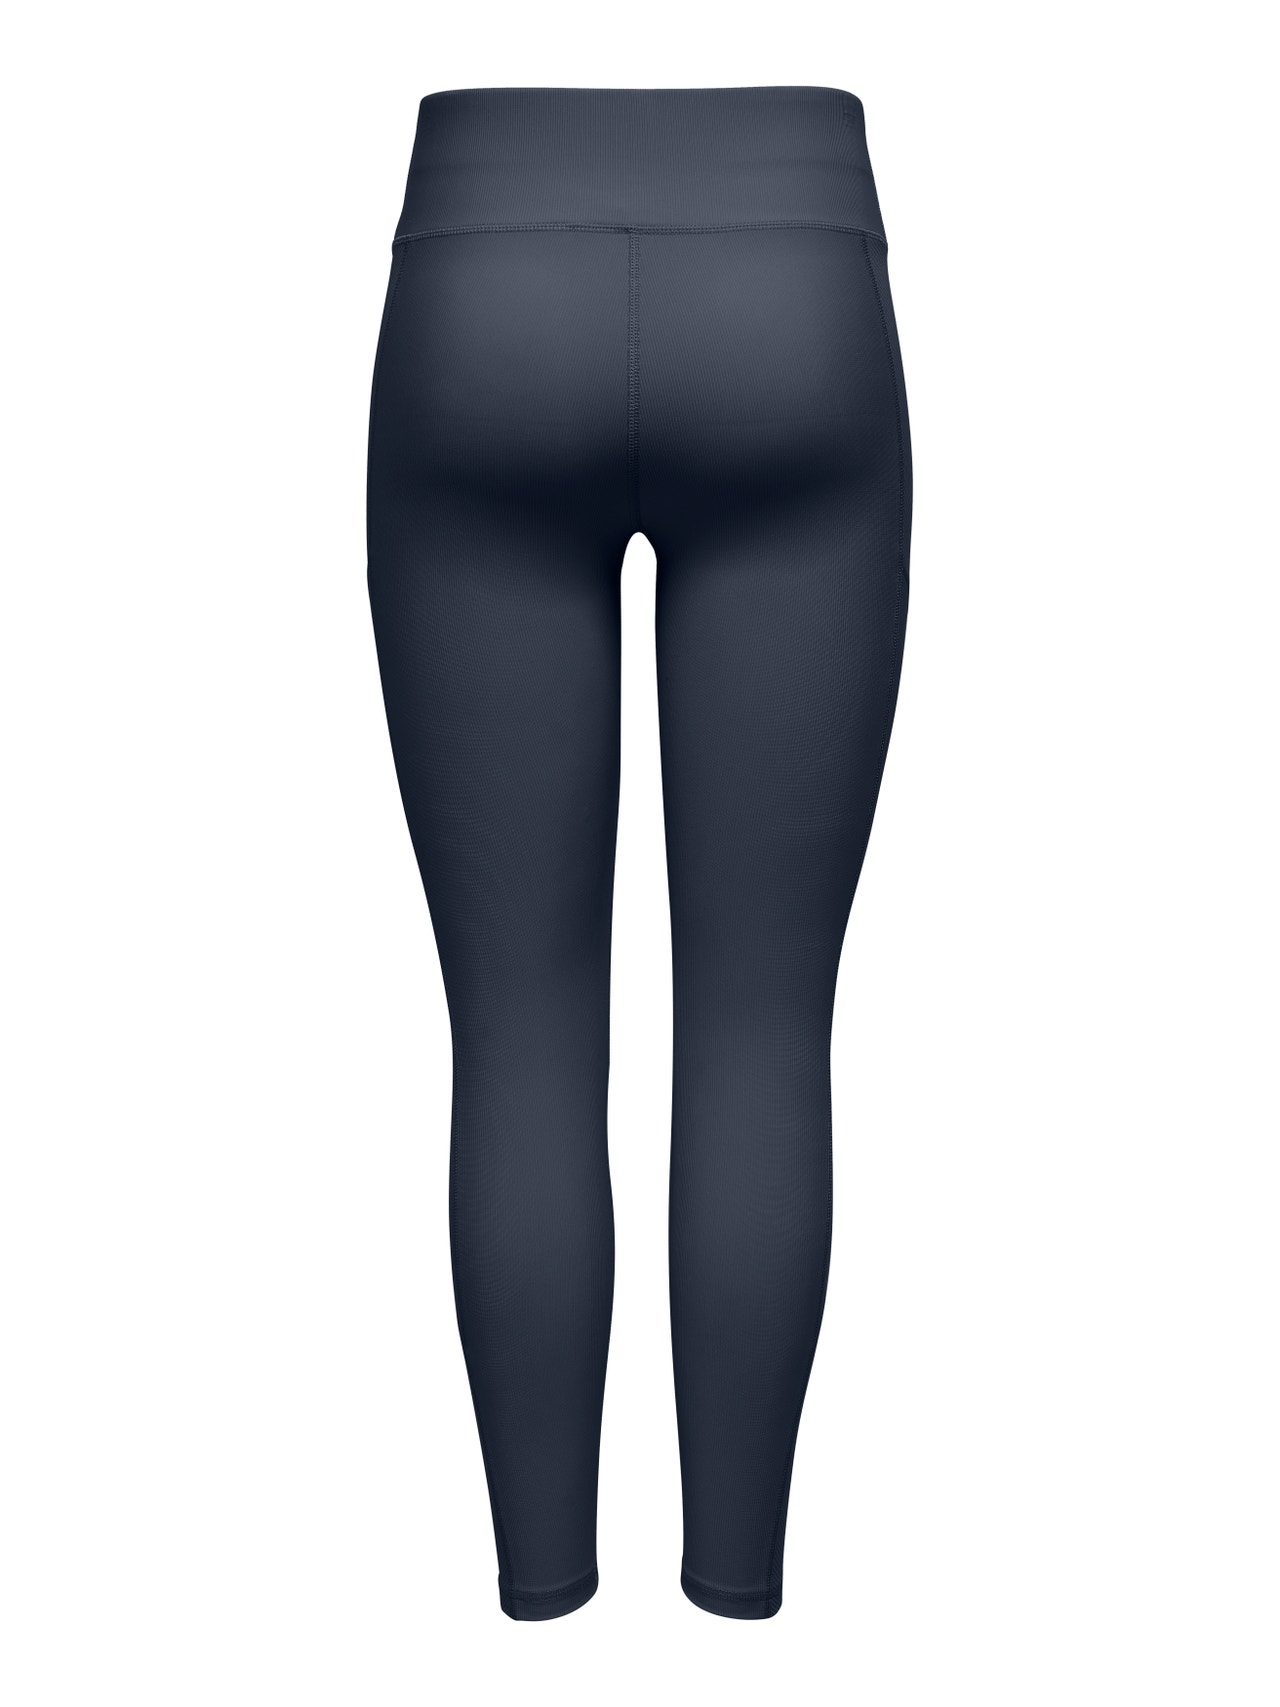 ONLY Tight Fit High waist Leggings -Blue Nights - 15207648